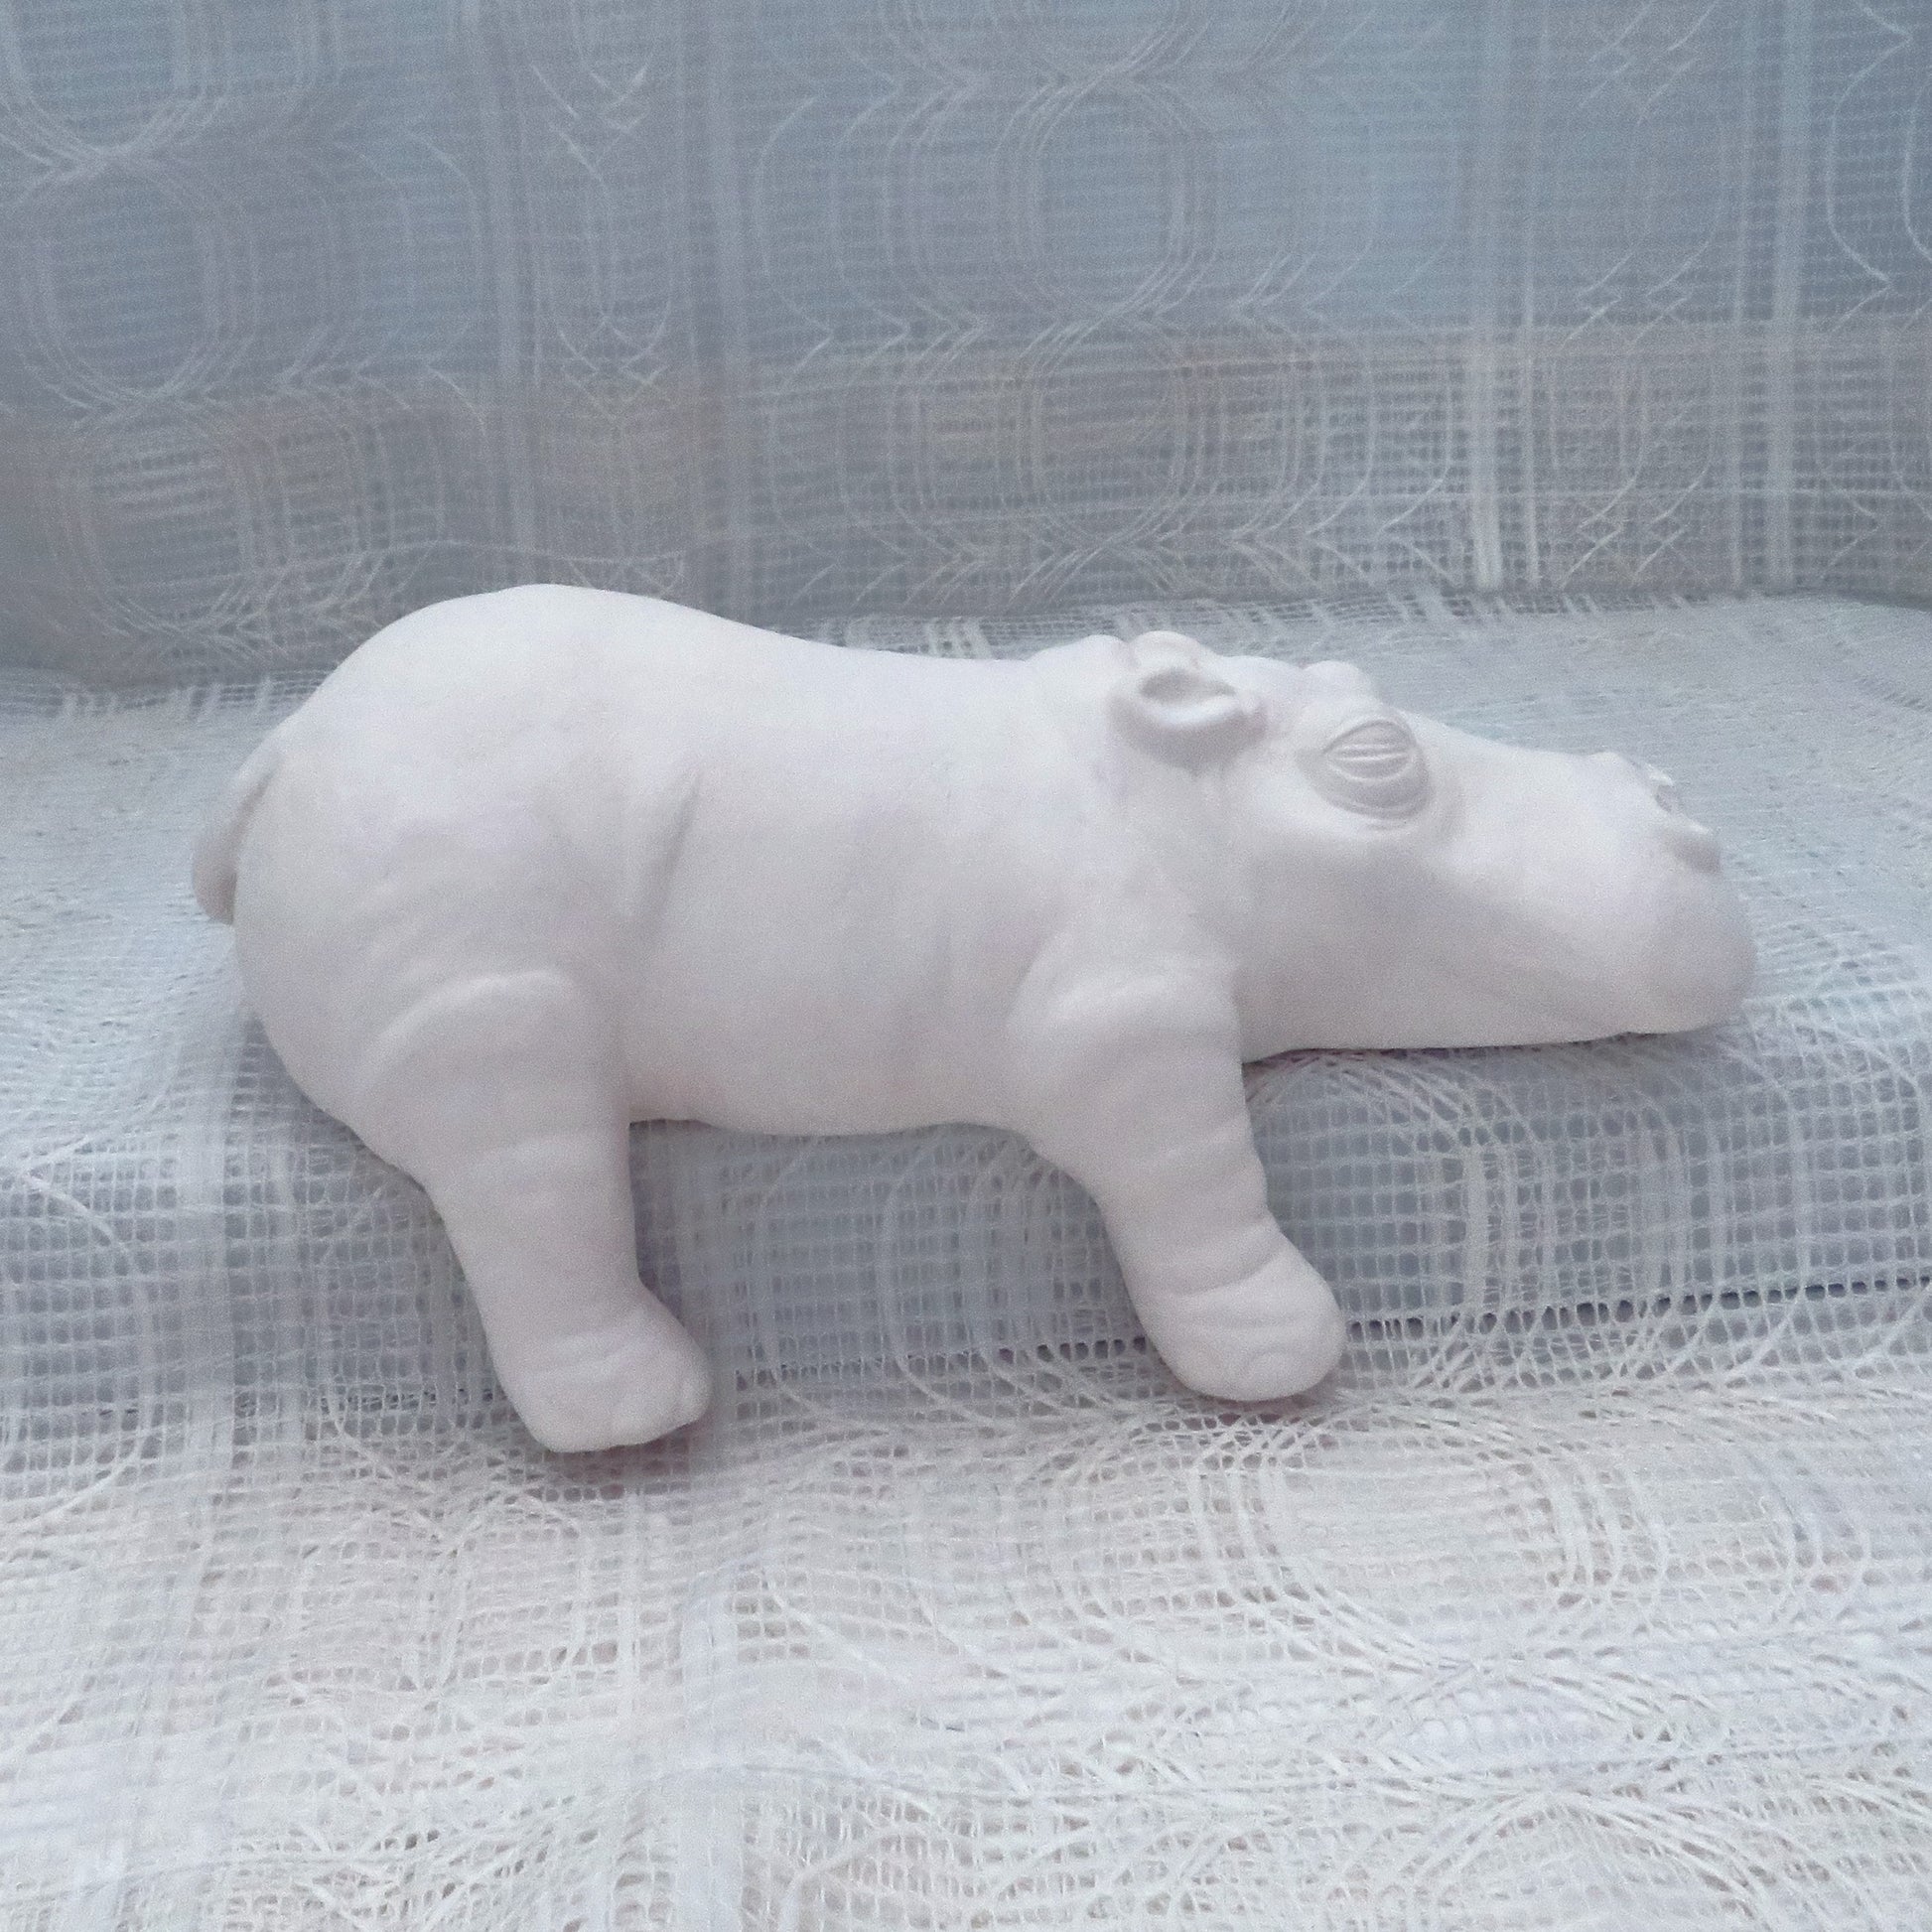 Large Ready to paint ceramic hippo figurine sitting on a shelf with its right legs hanging off.  There is an ecru lacy curtain behind and under it.